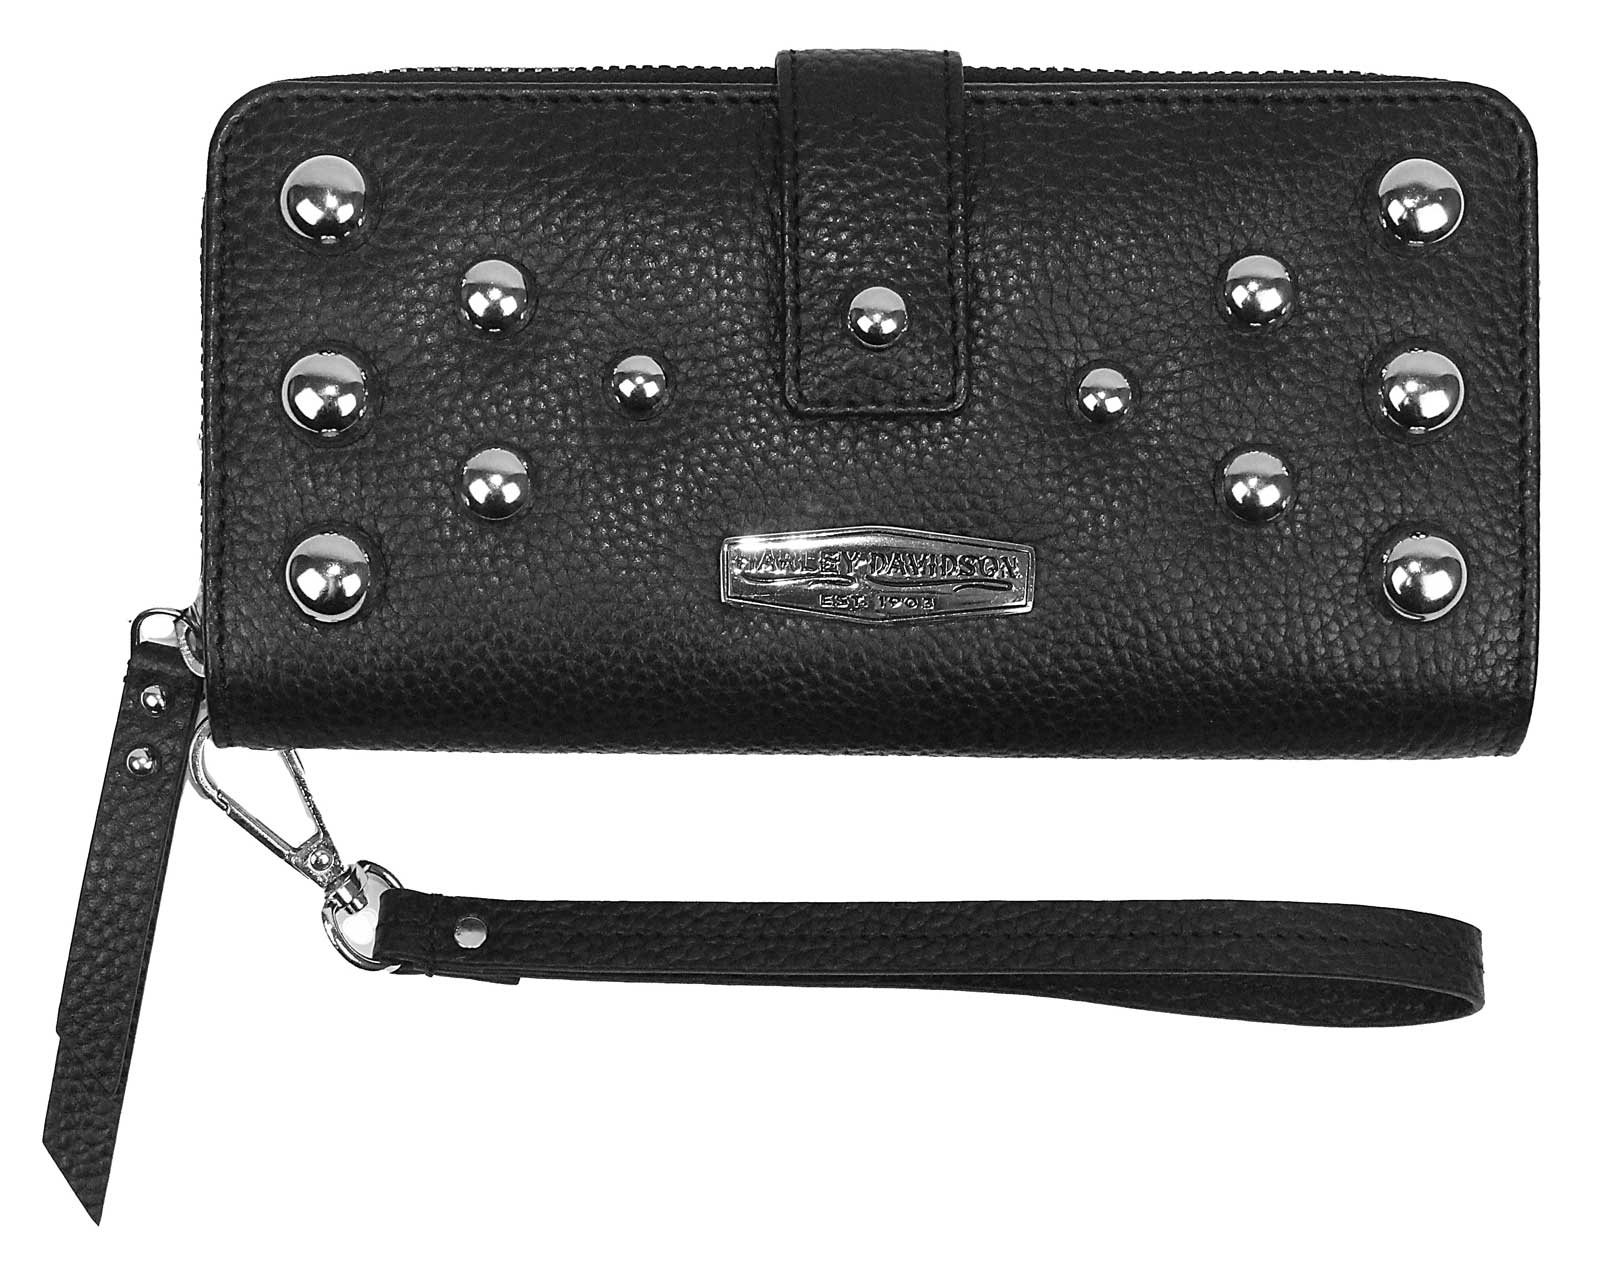 Harley-Davidson Womens Ombre Effect 7 in. Leather Clutch Wallet